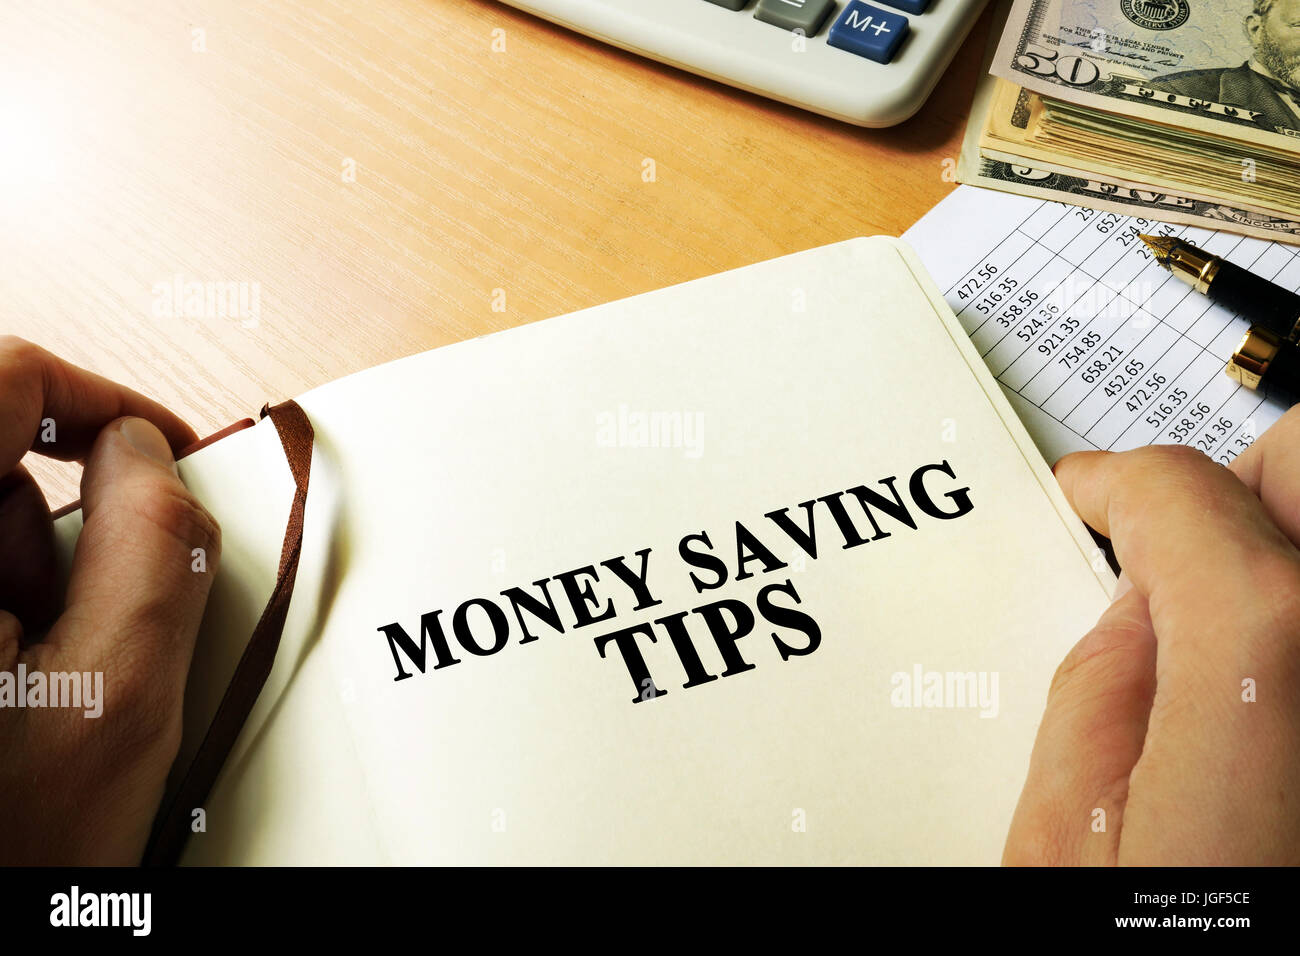 Hands holding book with title money saving tips. Stock Photo